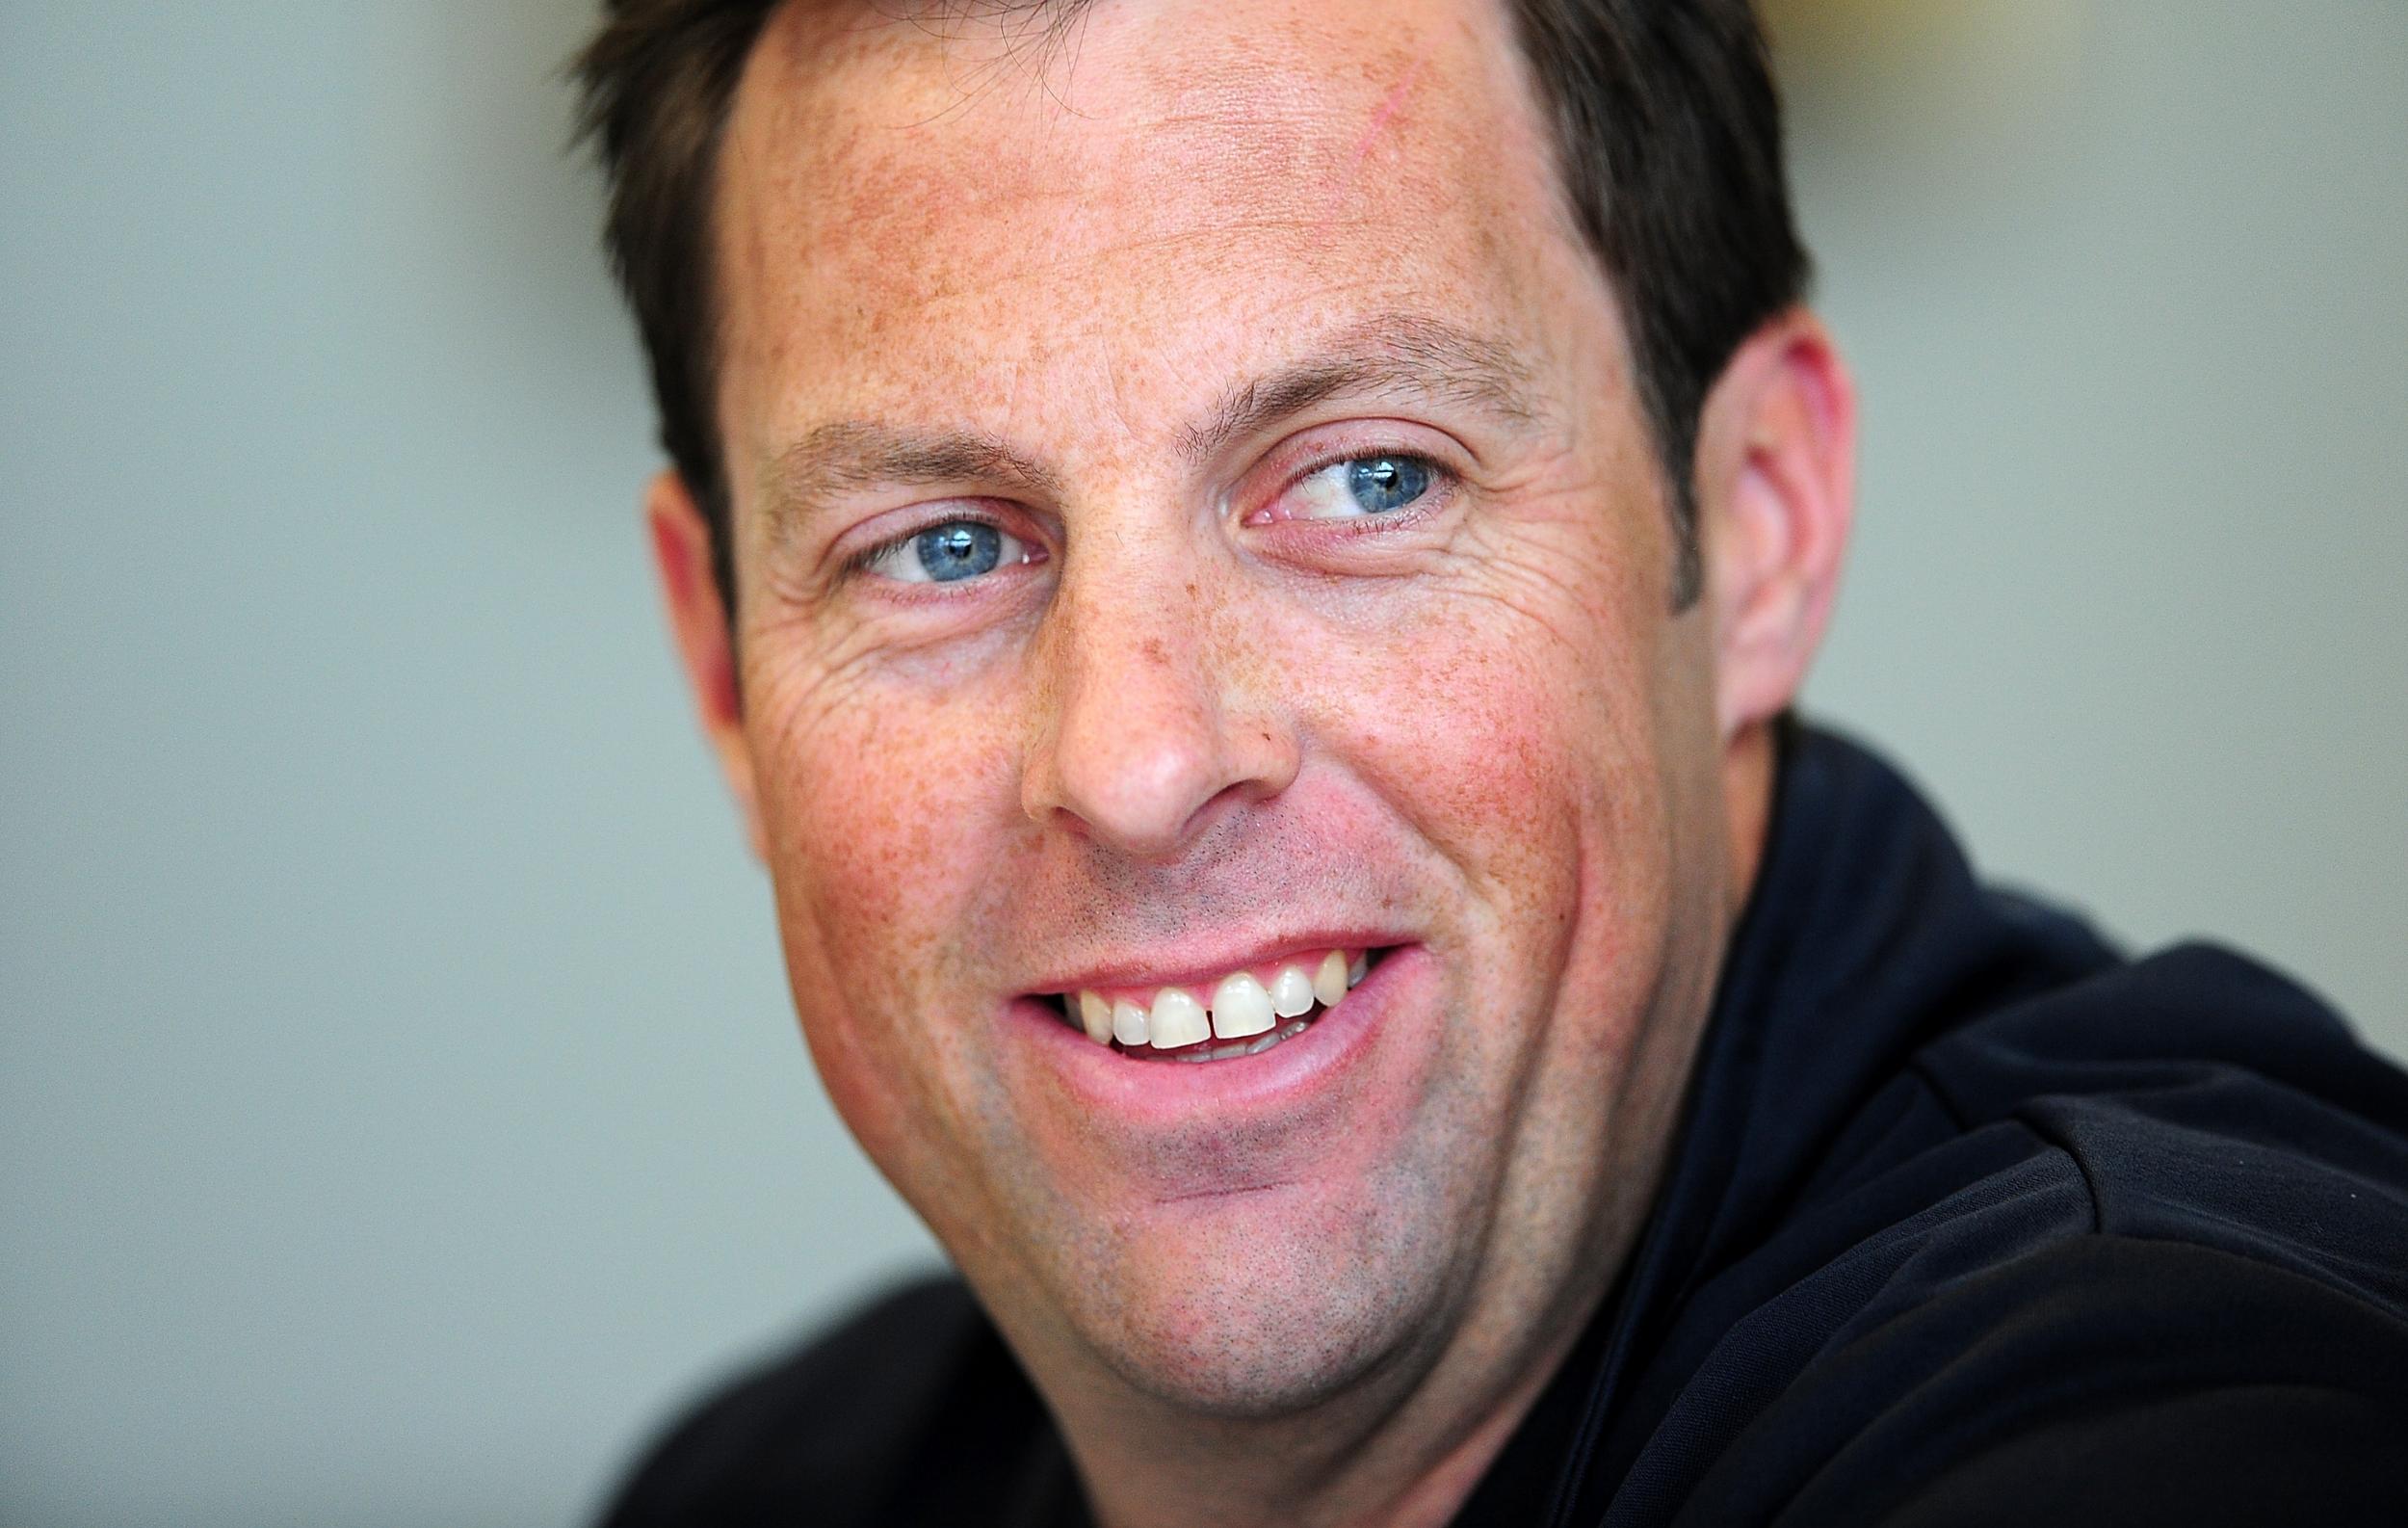 Marcus Trescothick’s mental health struggles were exacerbated by the demands of being an international cricketer